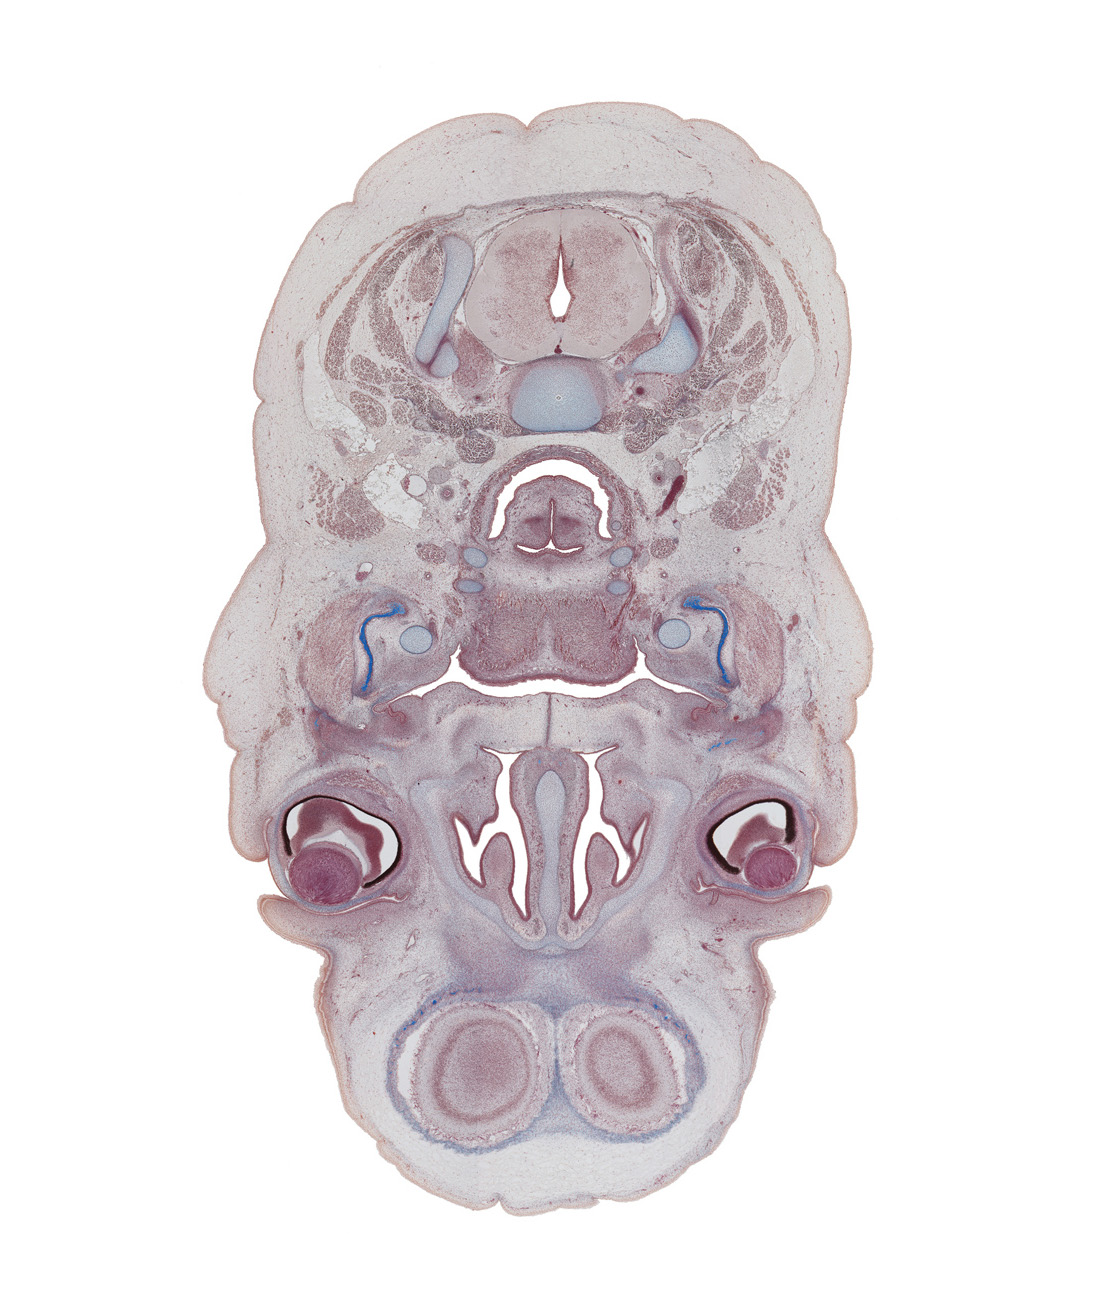 C-4 / C-5 interganglion region, central canal, dorsal horn of grey matter, edge of cerebral hemisphere (neopallium), edge of lens, frontal bone ossification, frontal lobe region of cerebral hemisphere, inferior nasal meatus, masseter muscle, nasal septal cartilage, parotid duct, pharyngeal arch 1 cartilage (Meckel), ramus of mandible, semispinalis capitis muscle, semispinalis cervicis muscle, splenius muscle, sternocleidomastoid muscle, trapezius muscle, ventral horn of grey matter